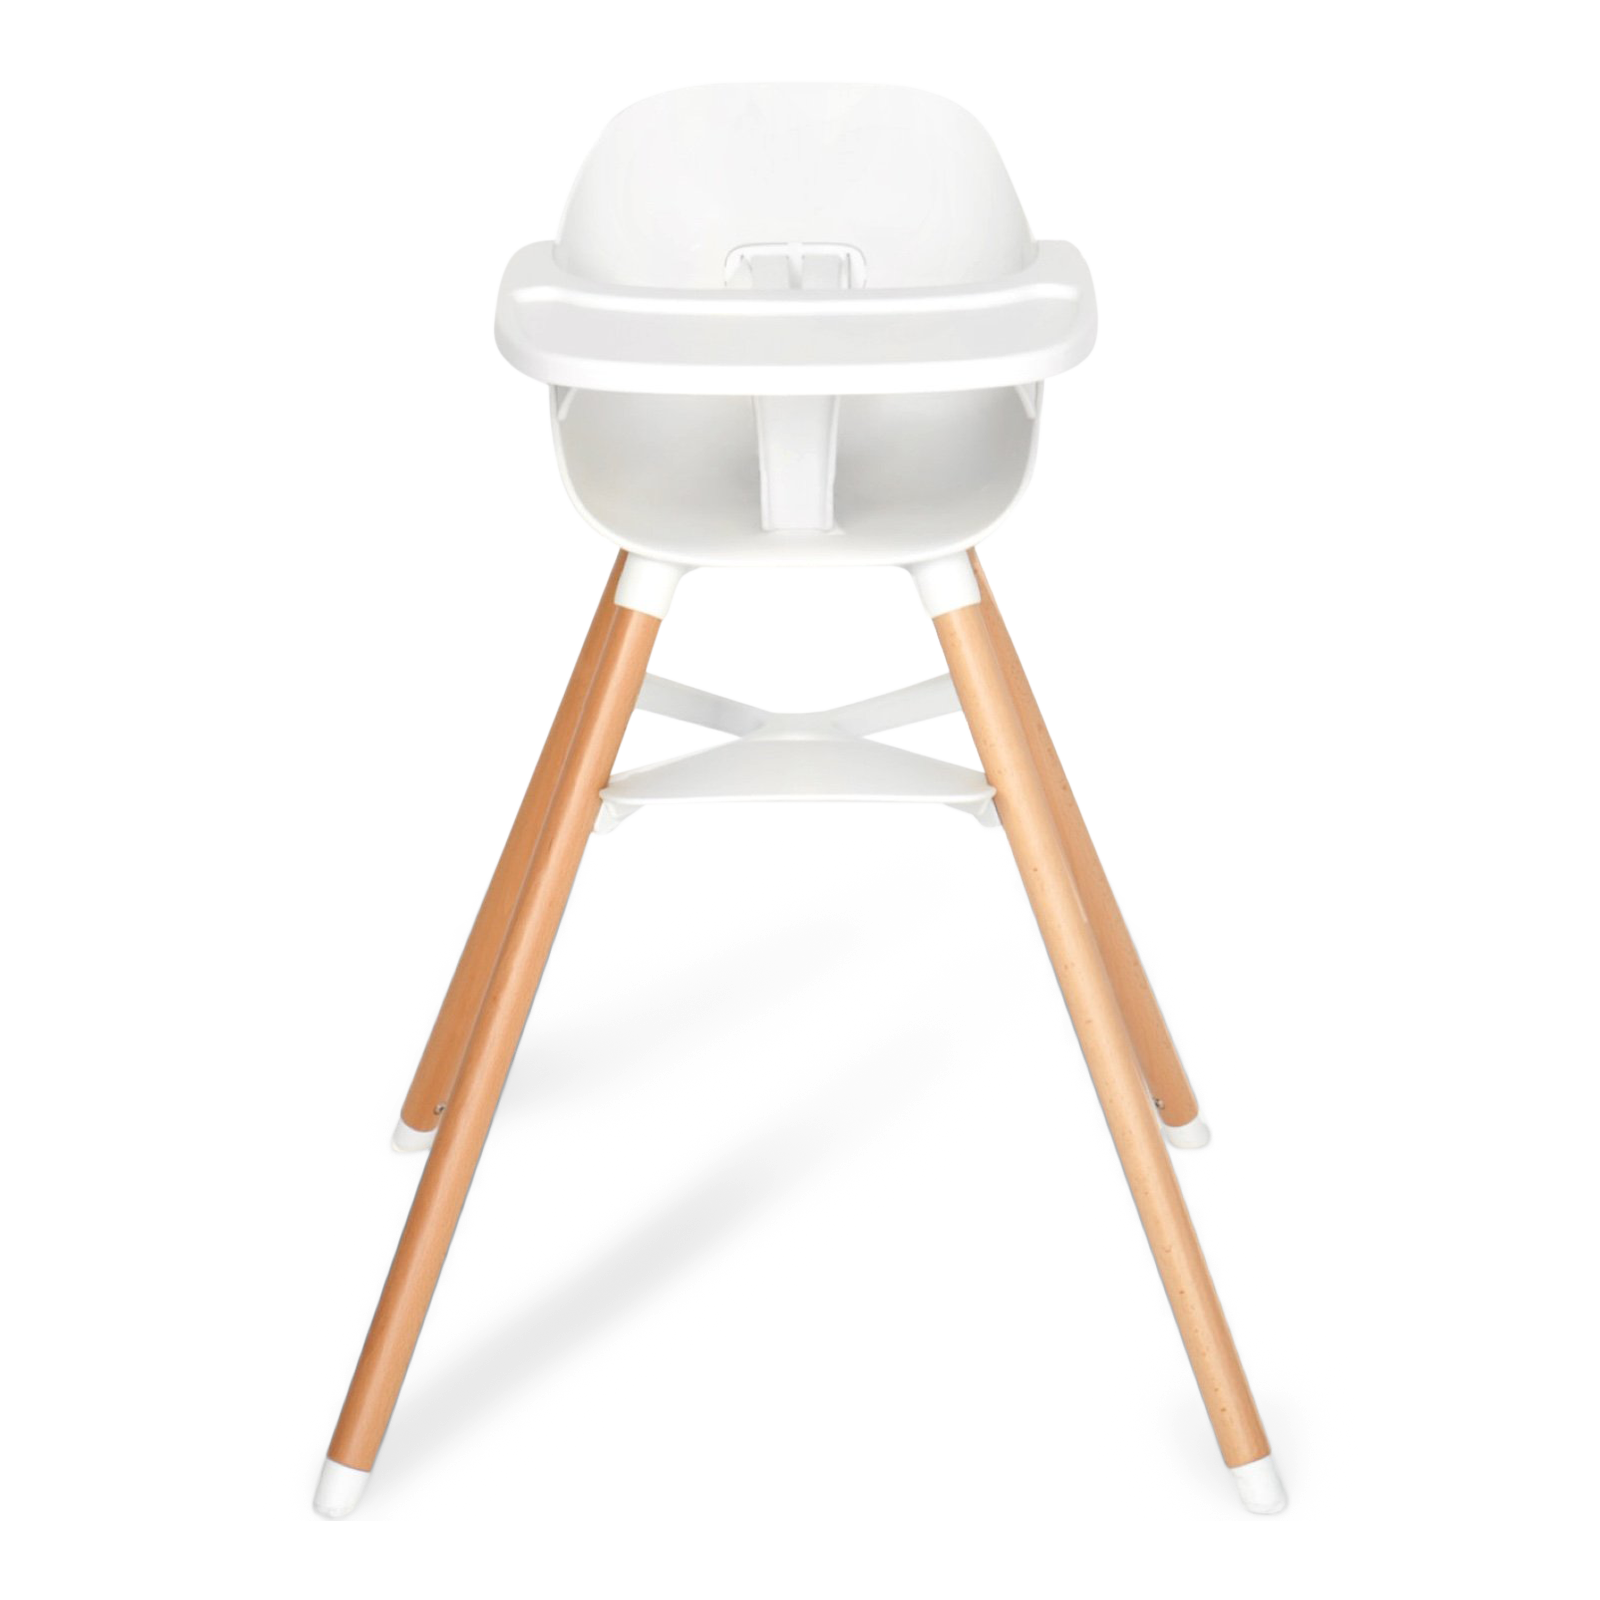 old style wooden high chair